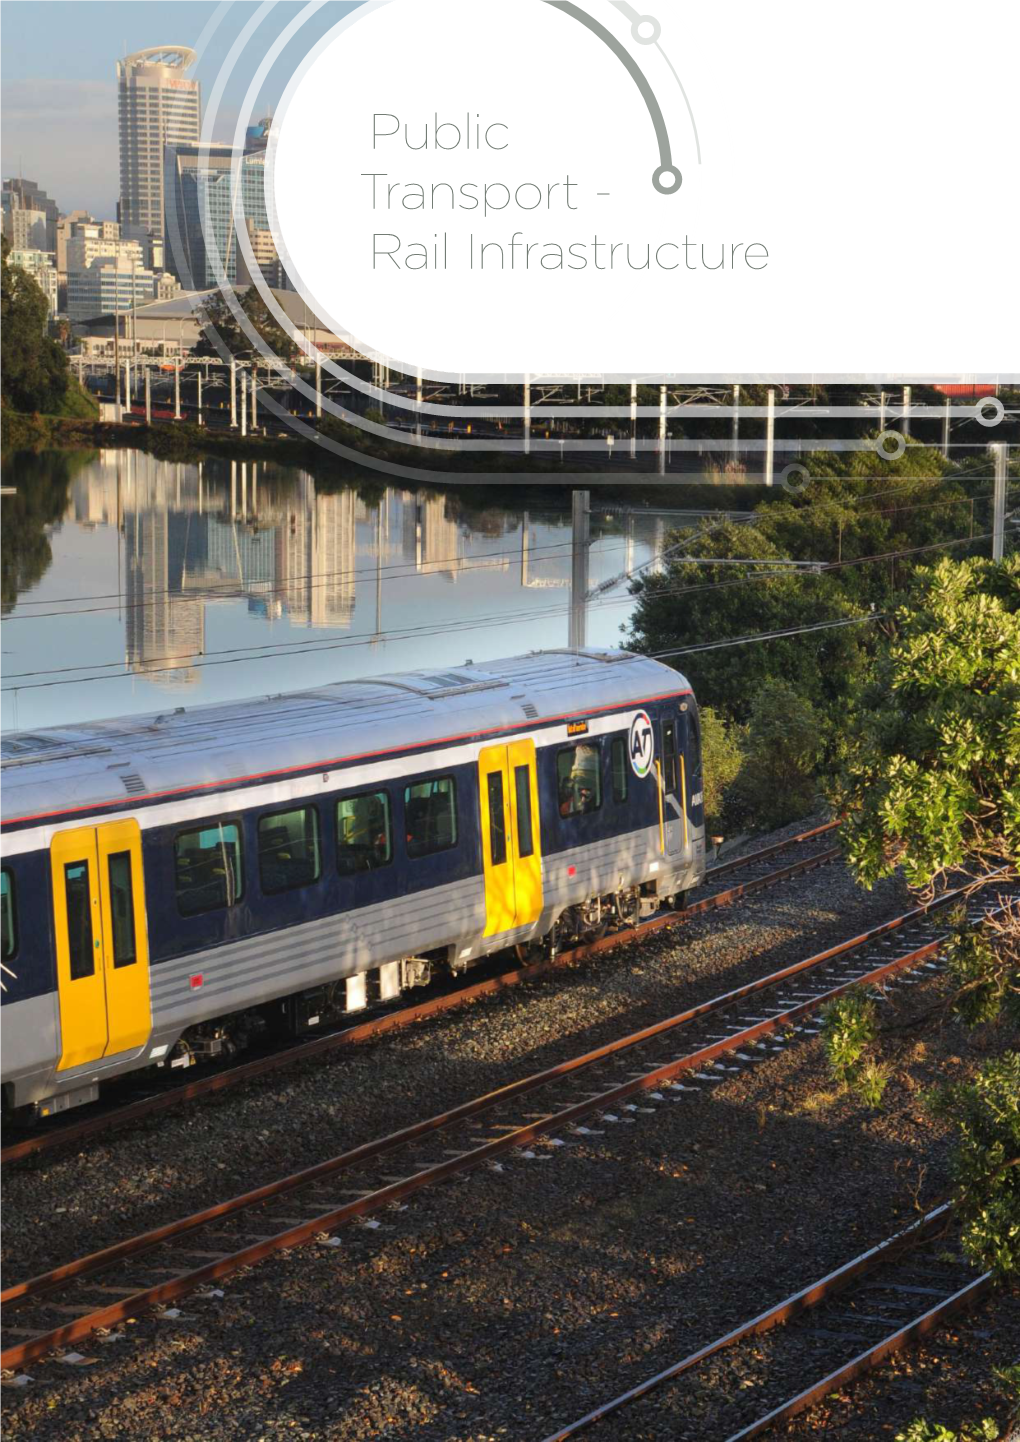 Public Transport - Rail Infrastructure in This Chapter